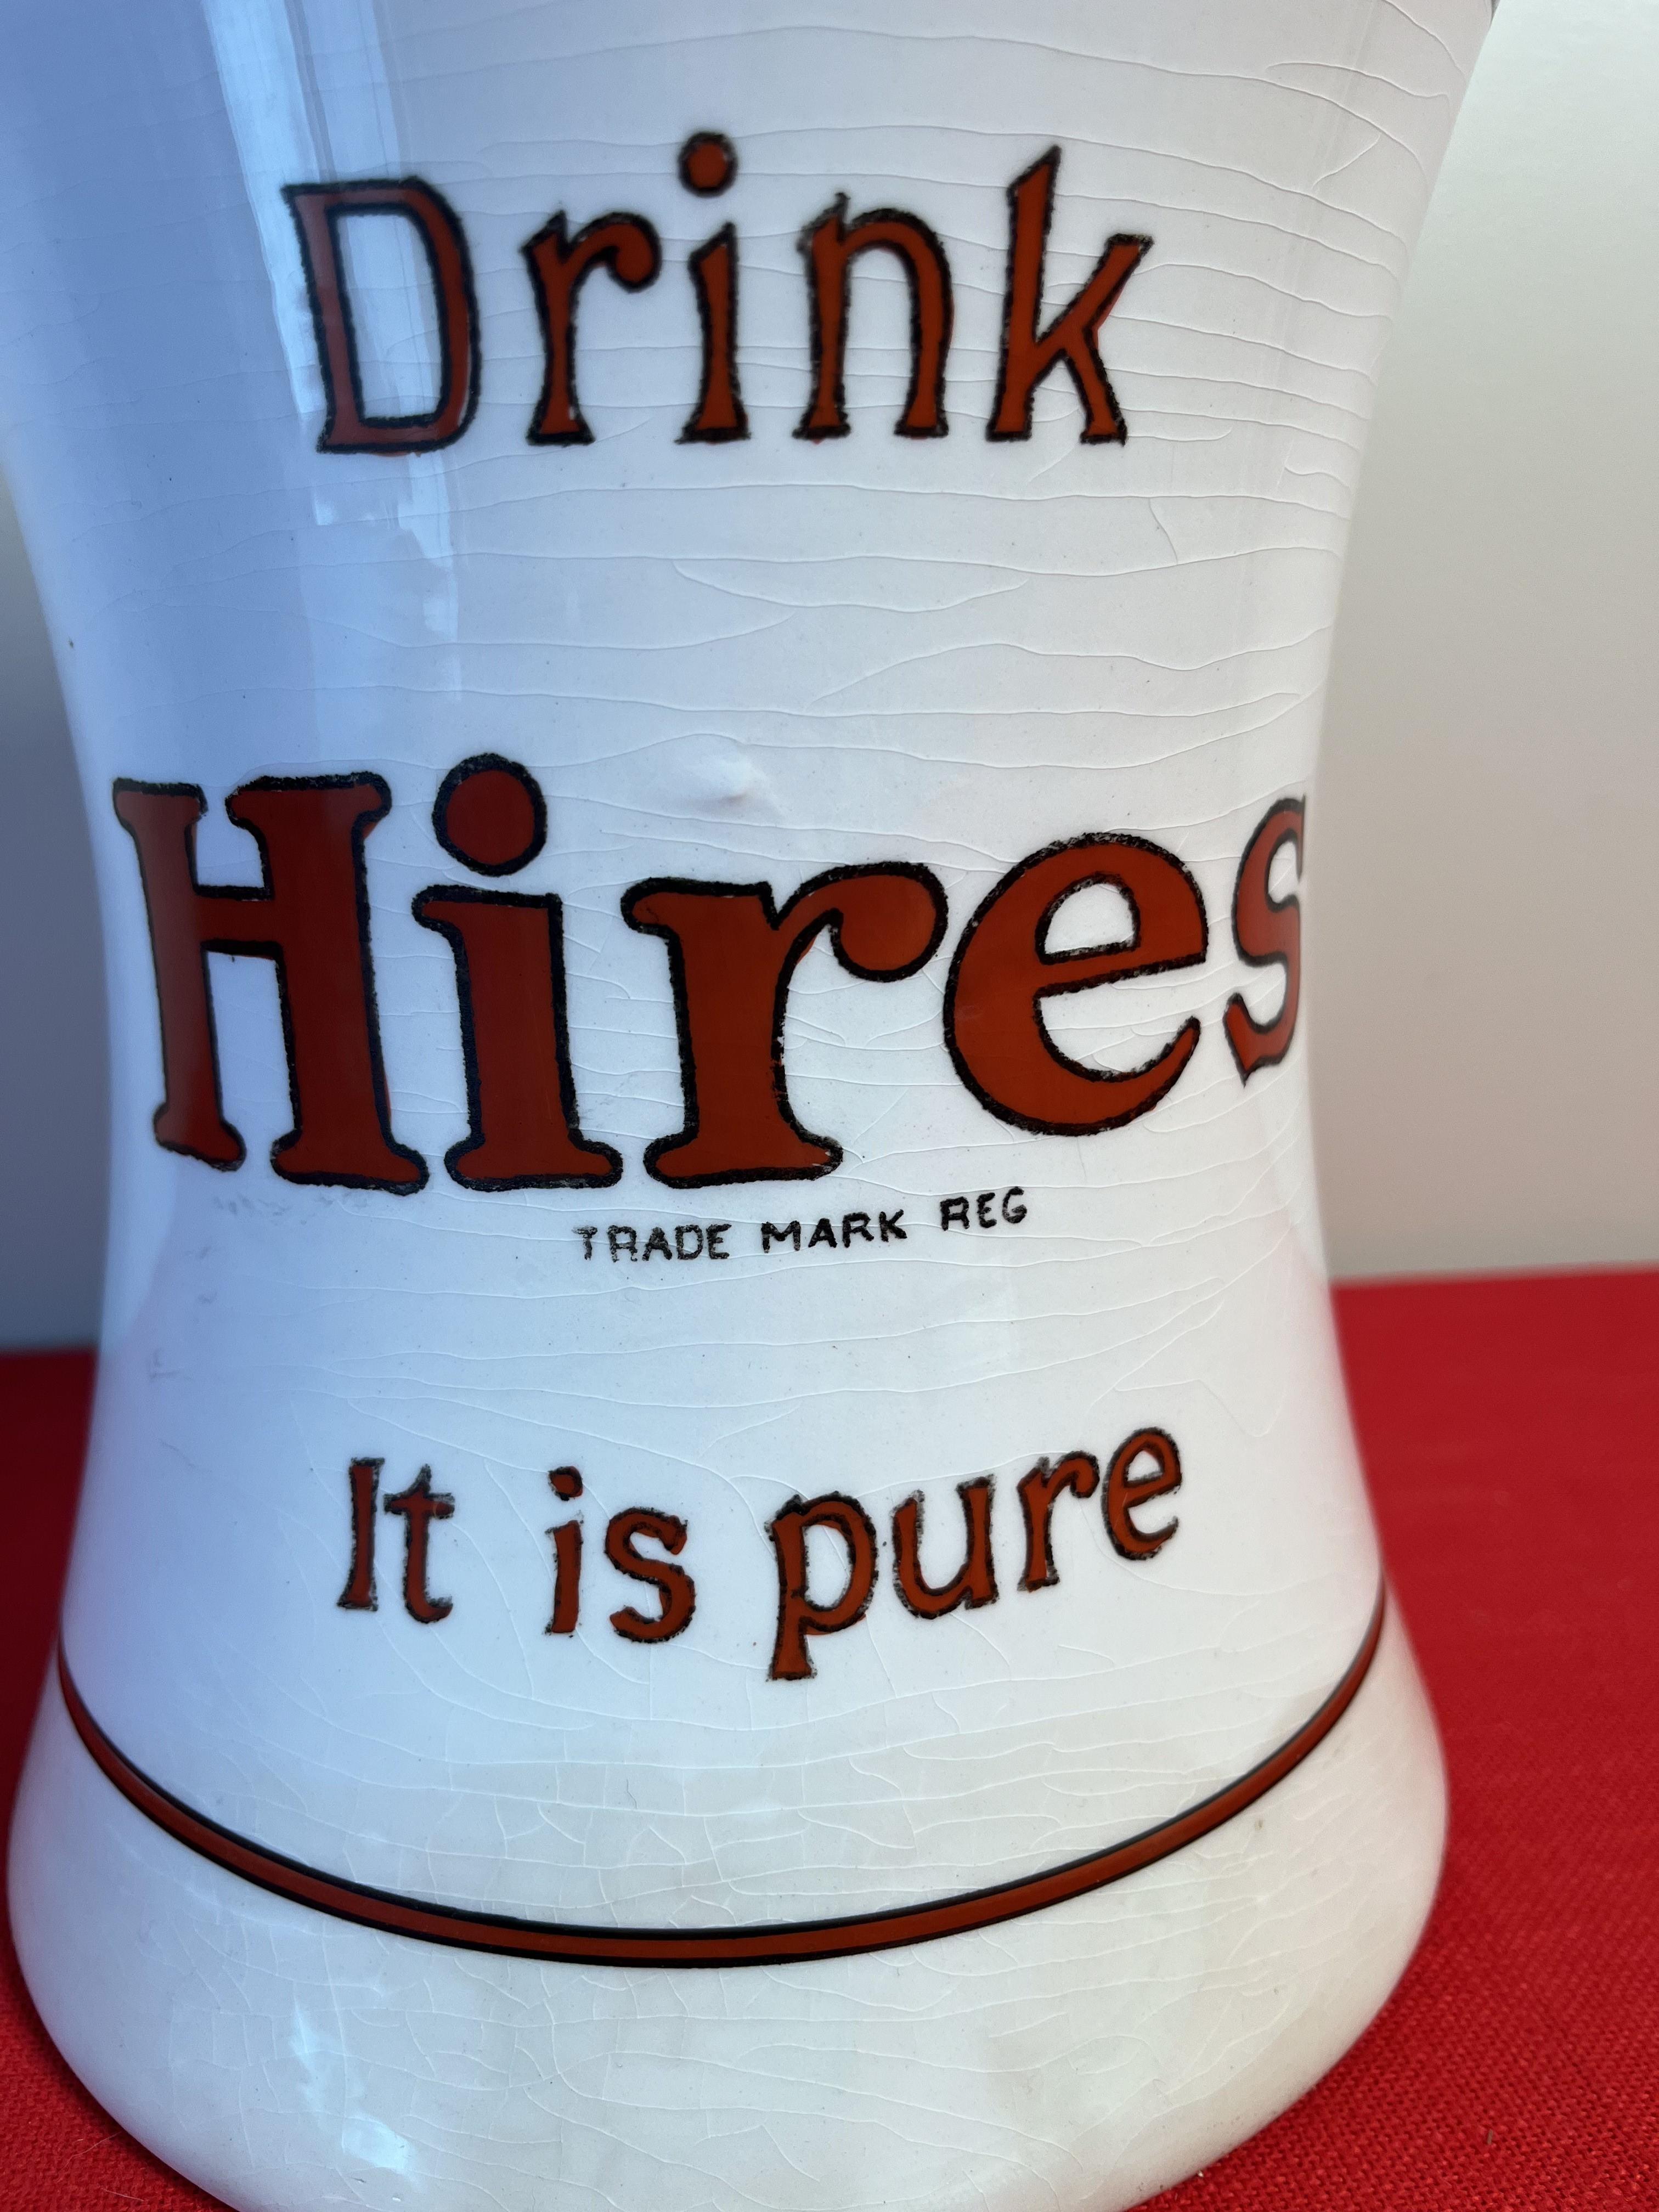 Hires Root Beer Syrup Dispenser